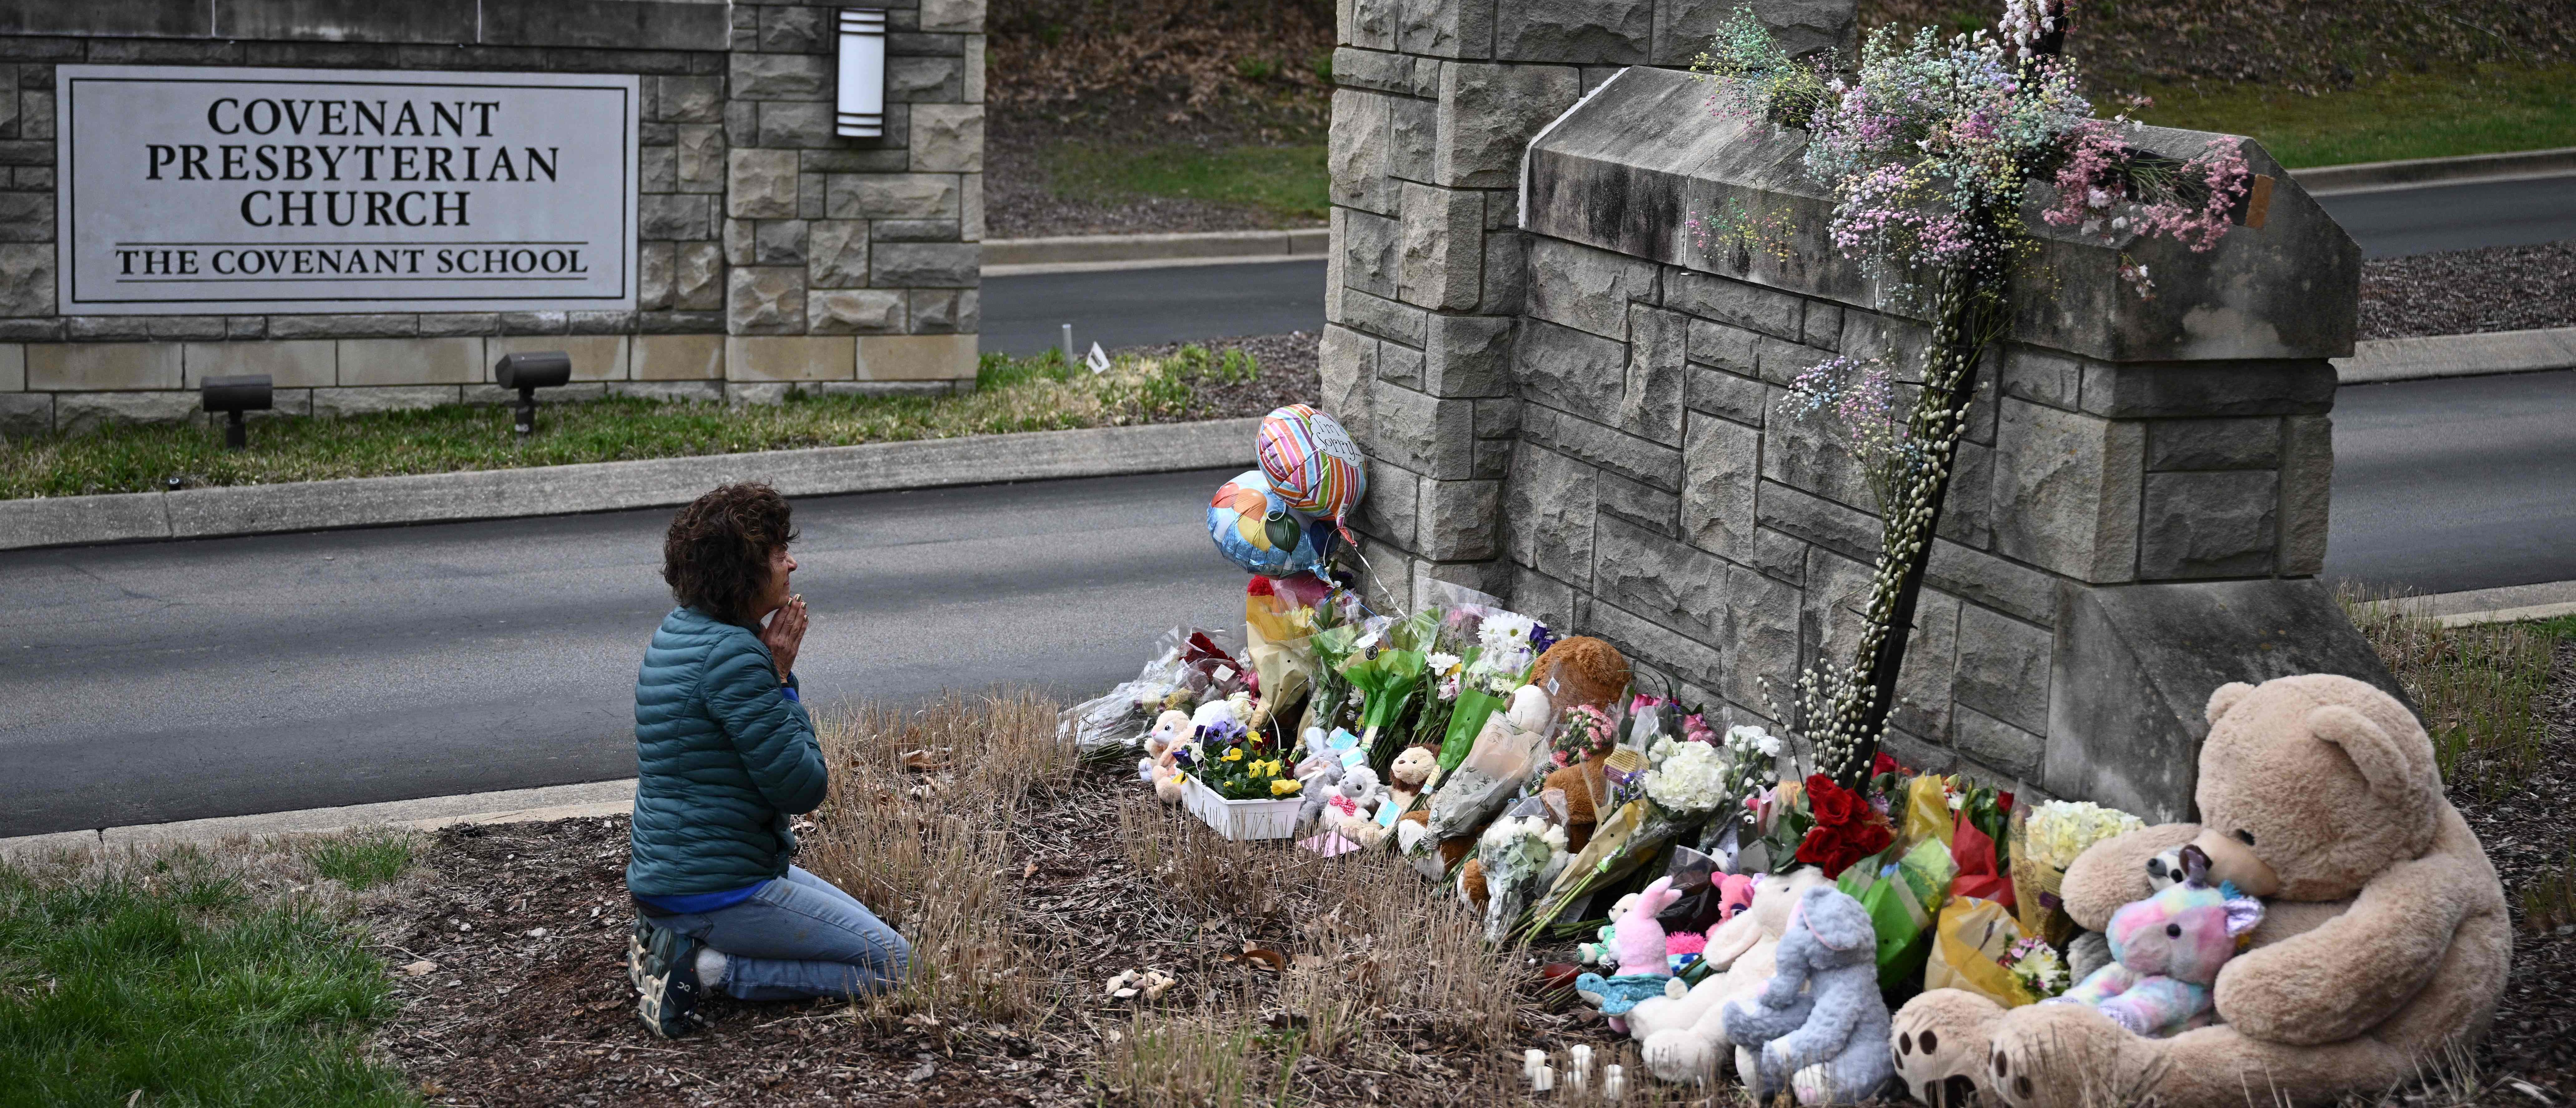 Robin Wolfenden prays at a makeshift memorial for victims outside the Covenant School building at the Covenant Presbyterian Church following a shooting, in Nashville, Tennessee, on March 28, 2023. - A heavily armed former student killed three young children and three staff in what appeared to be a carefully planned attack at a private elementary school in Nashville on March 27, before being shot dead by police. Chief of Police John Drake named the suspect as Audrey Hale, 28, who the officer later said identified as transgender. (Photo by Brendan SMIALOWSKI / AFP) (Photo by BRENDAN SMIALOWSKI/AFP via Getty Images)